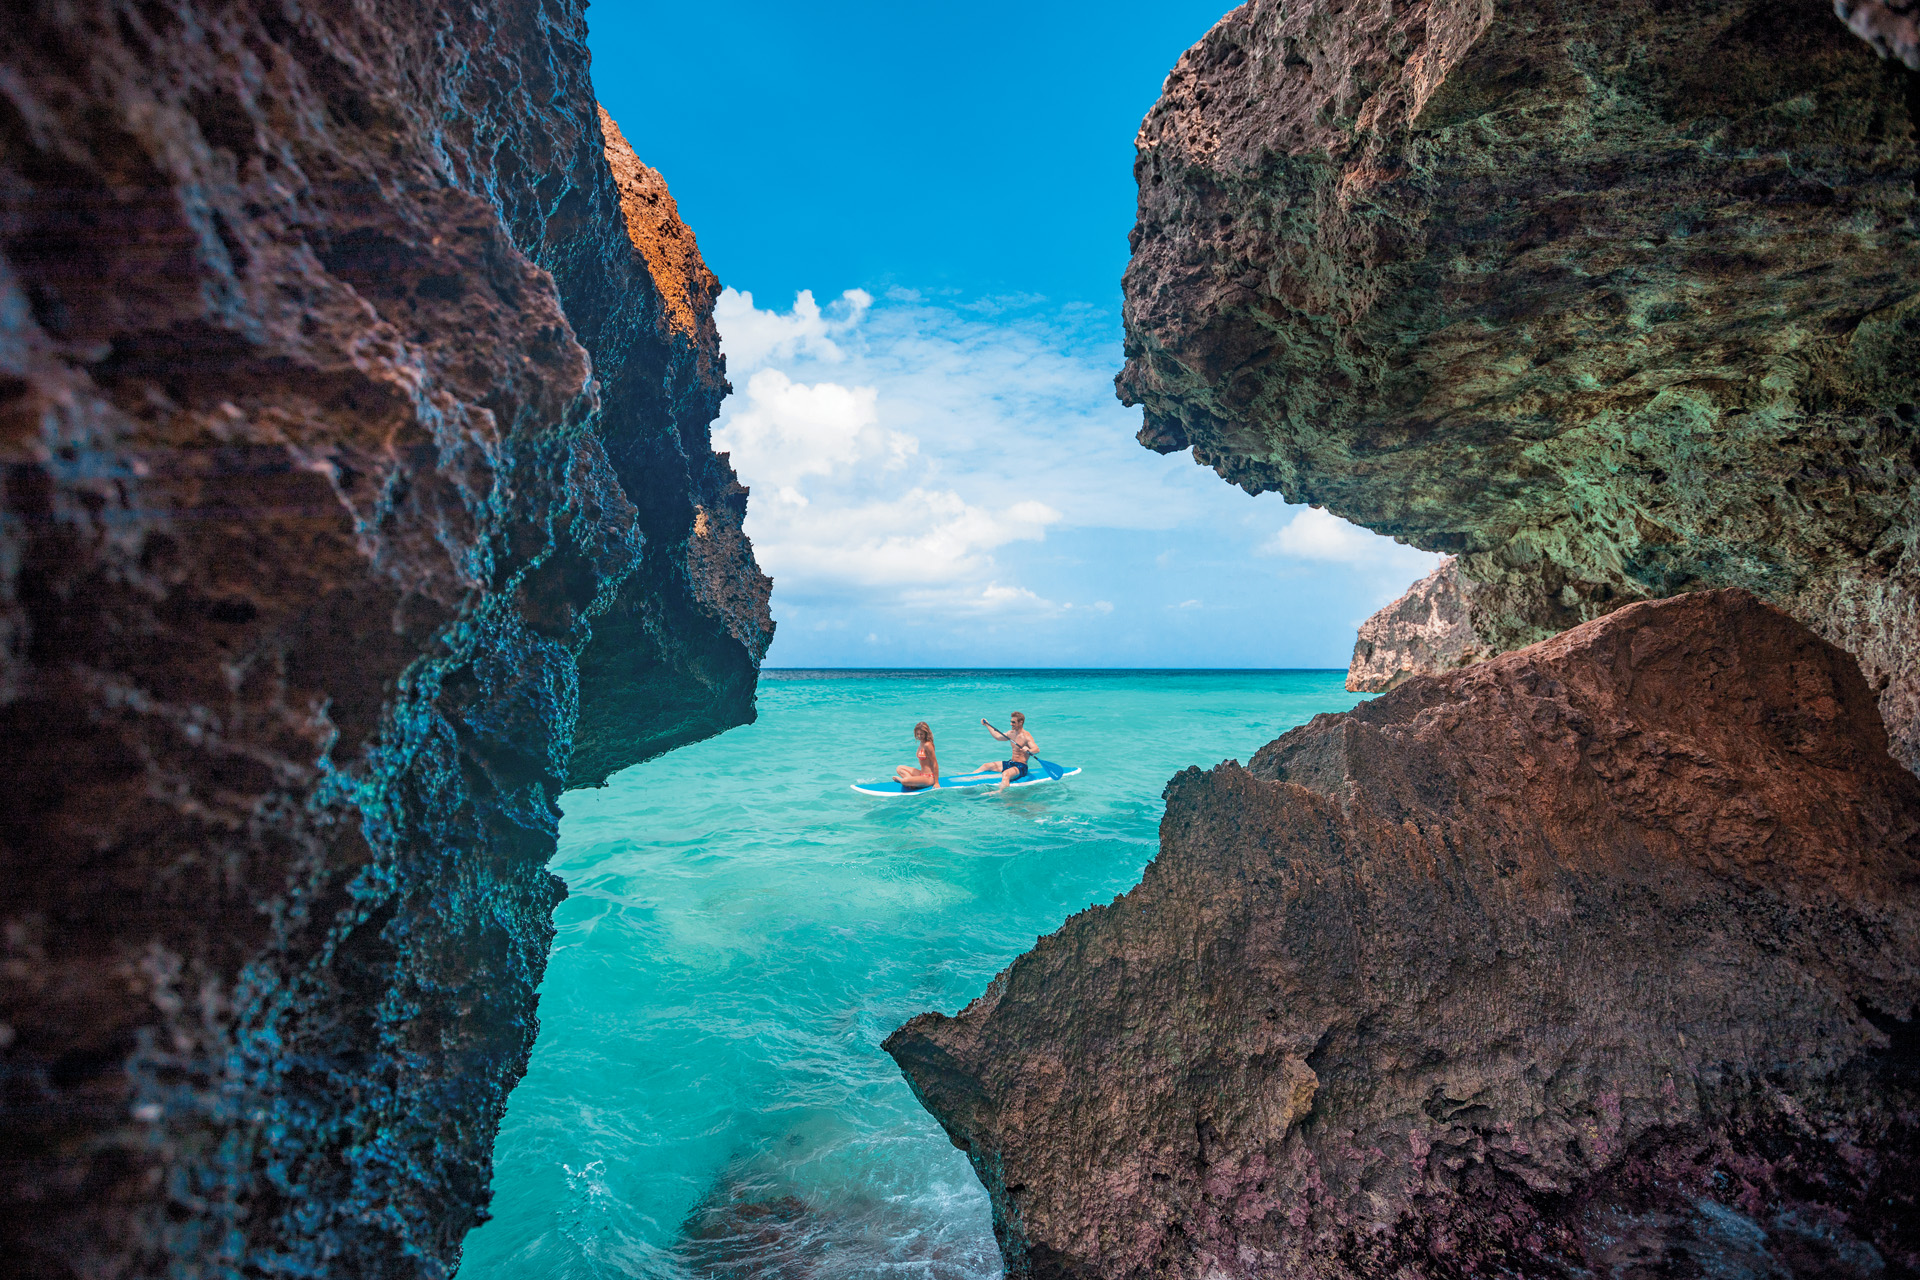 A Guide To The Caribbean’s Hidden Gems